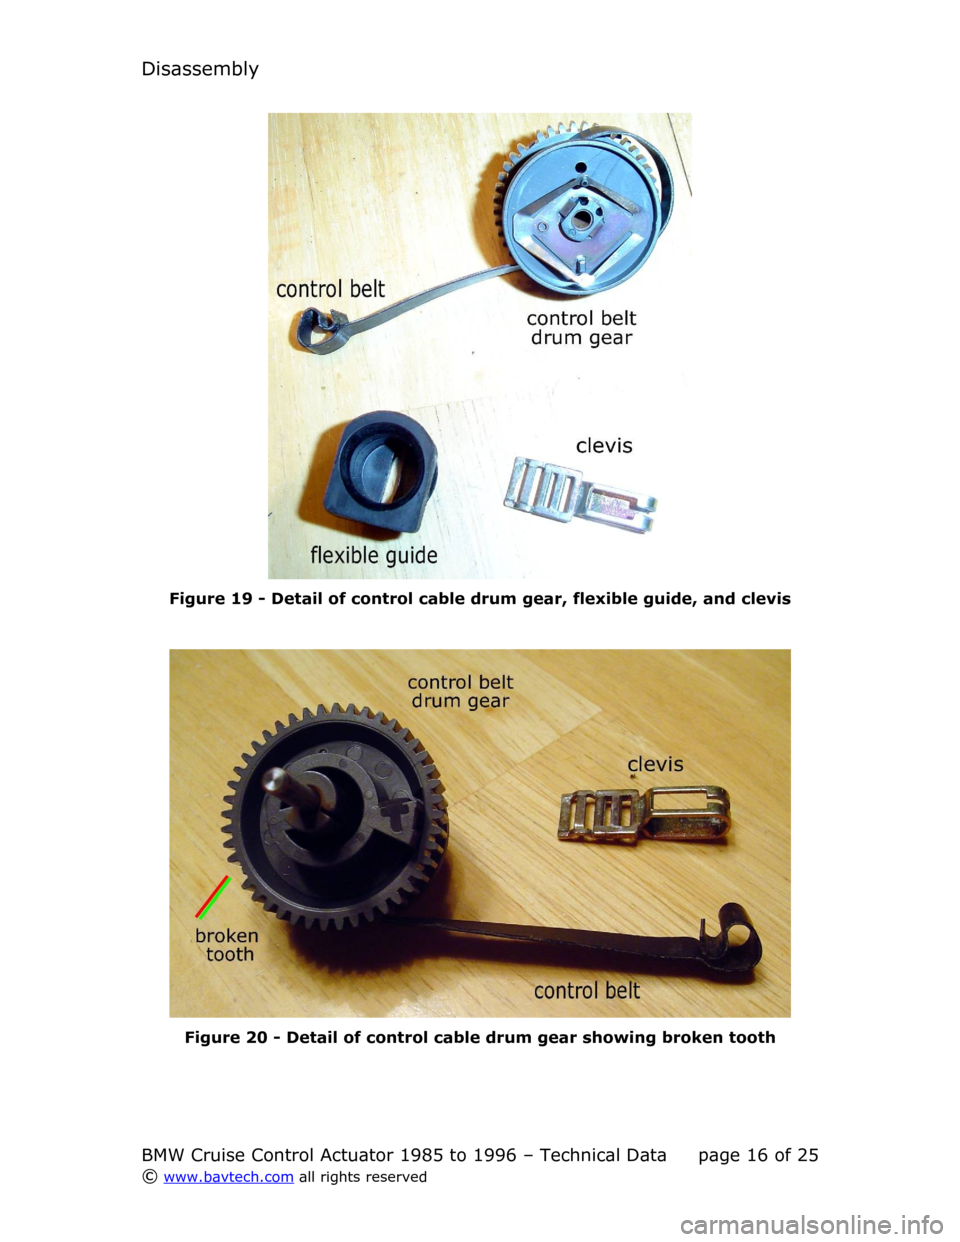 BMW 5 SERIES 1994 E34 Cruise Control Acutator Disassembly
Figure  19  - Detail of control cable drum gear, flexible guide, and clevis
Figure  20  - Detail of control cable drum gear showing broken tooth
BMW Cruise Control Actuator 1985 to 1996 �